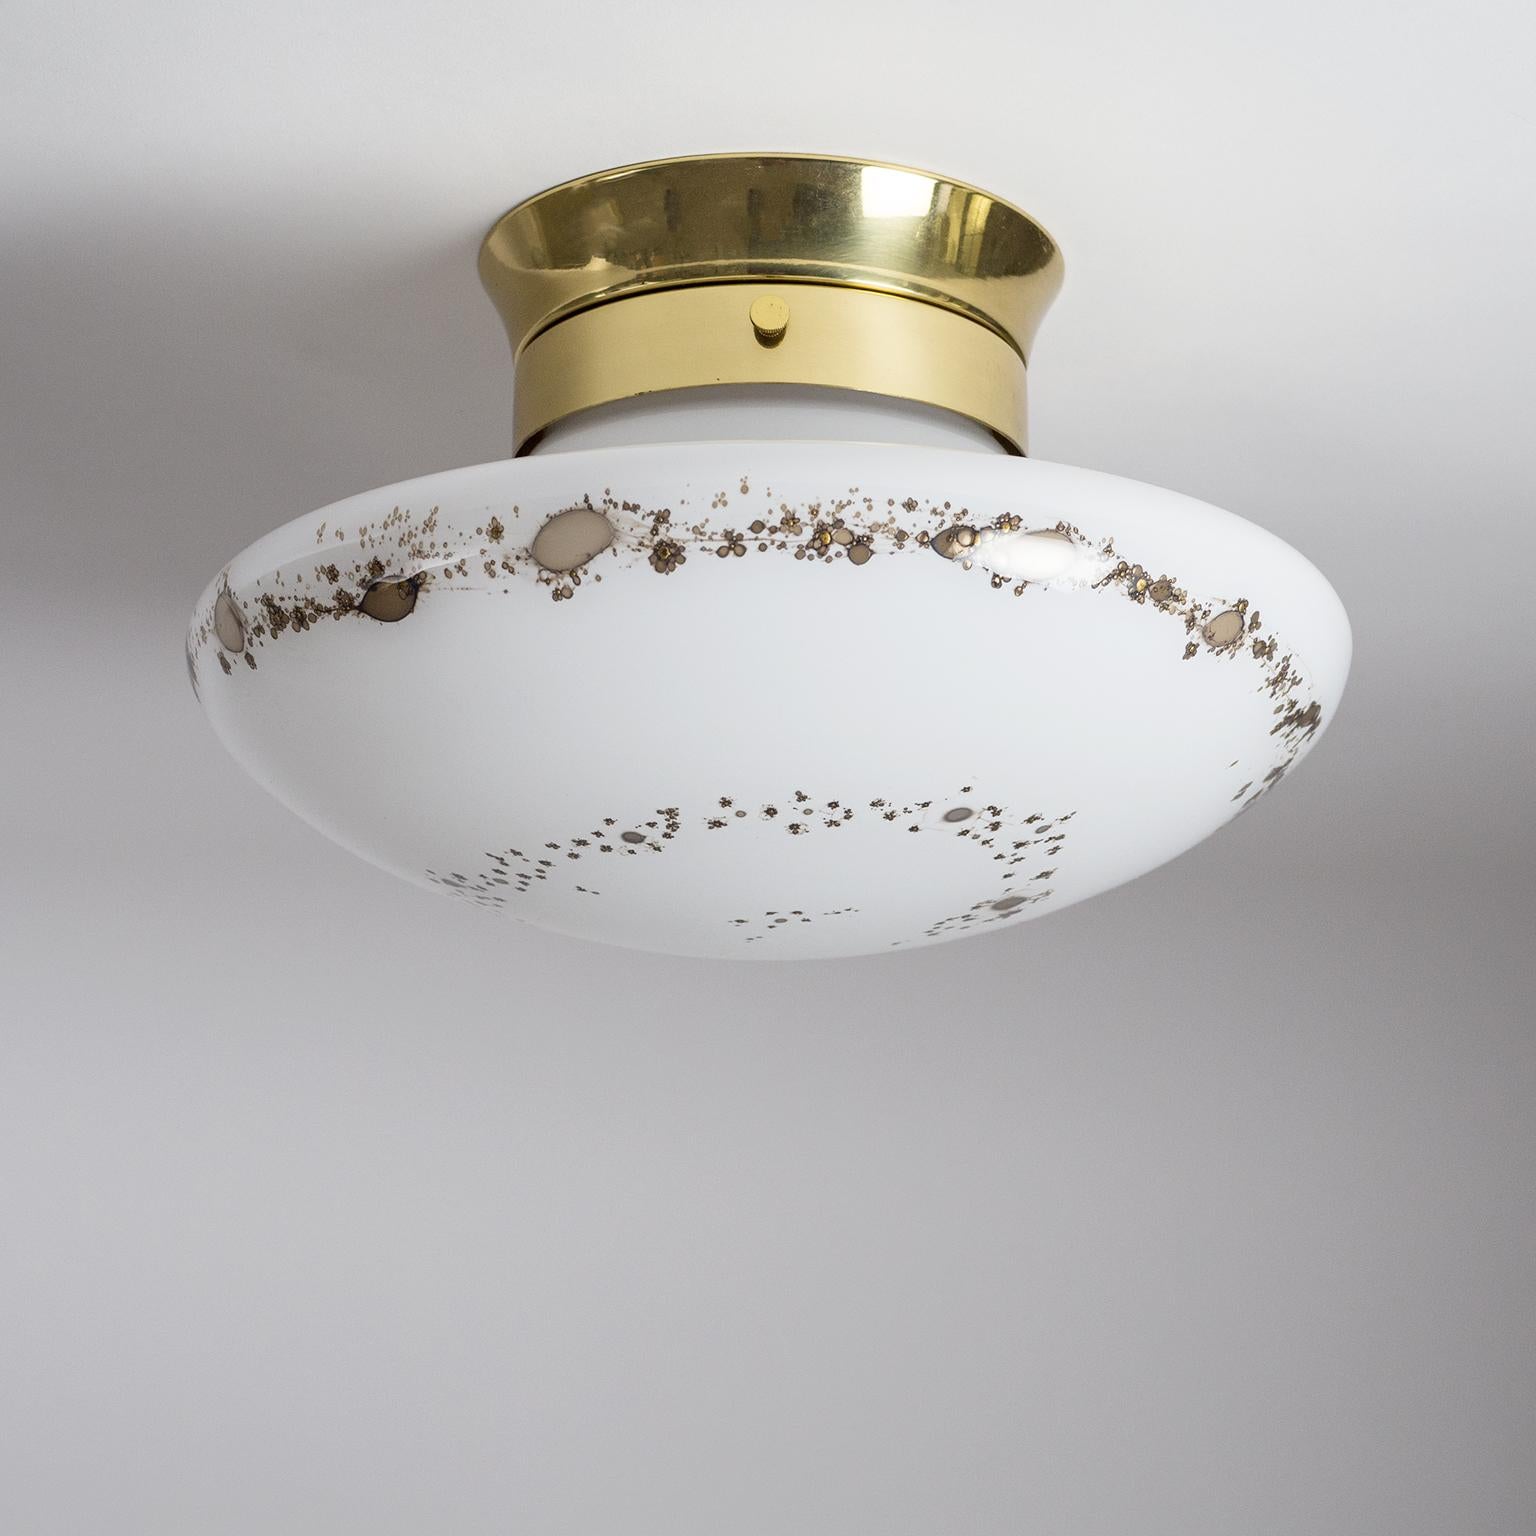 Very fine 1970s glass mushroom flush mount. A sleek brass ceiling unit holds a 'mushroom' blown glass diffuser which has gold-metallic inclusions applied in a spiraling shape. Excellent original condition with one E27 socket and manufacturers label